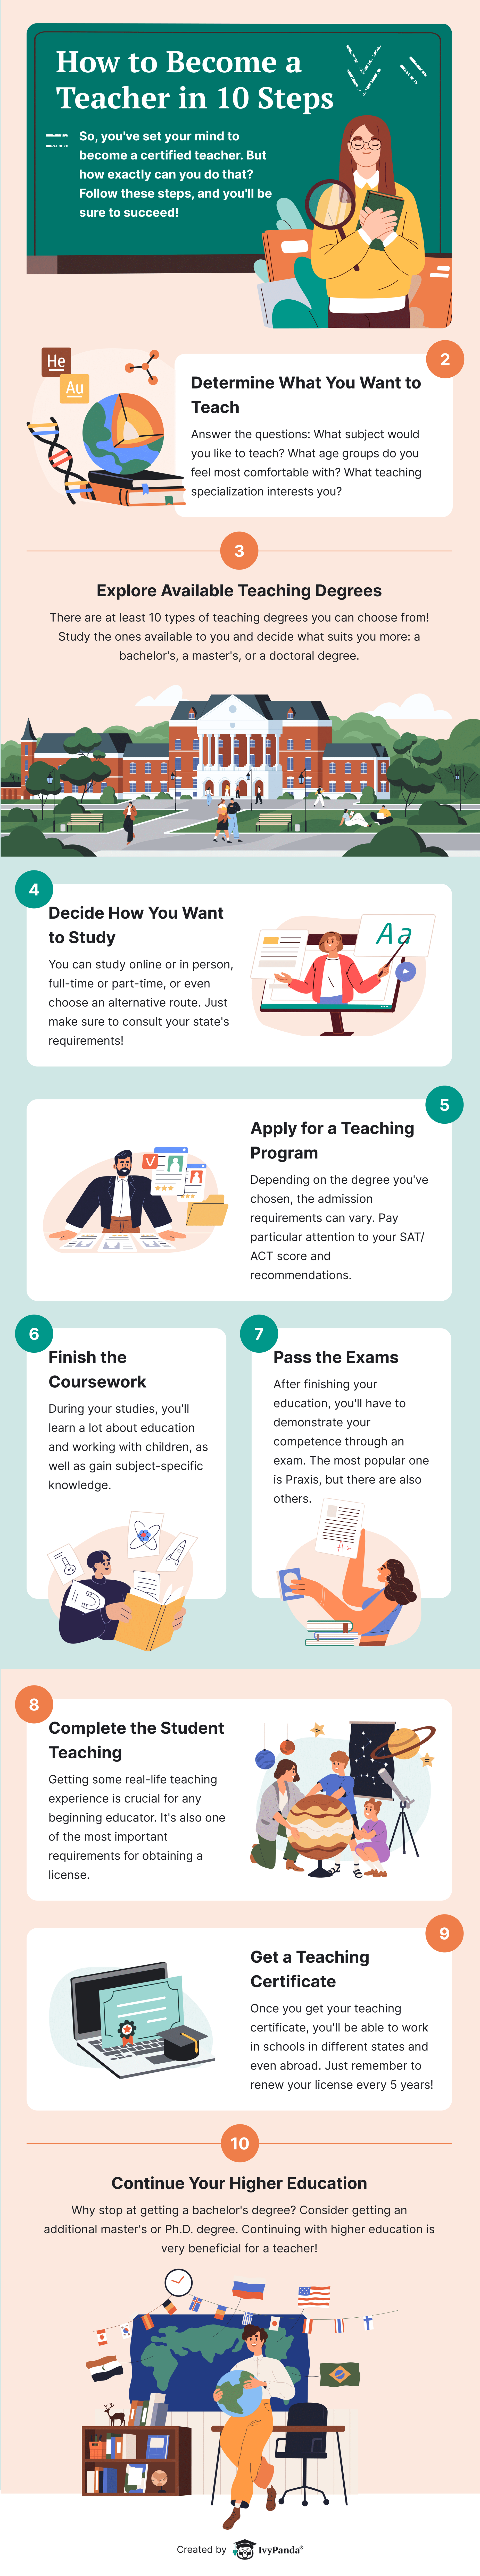 Infographic showing how to become a certified teacher in 10 steps.